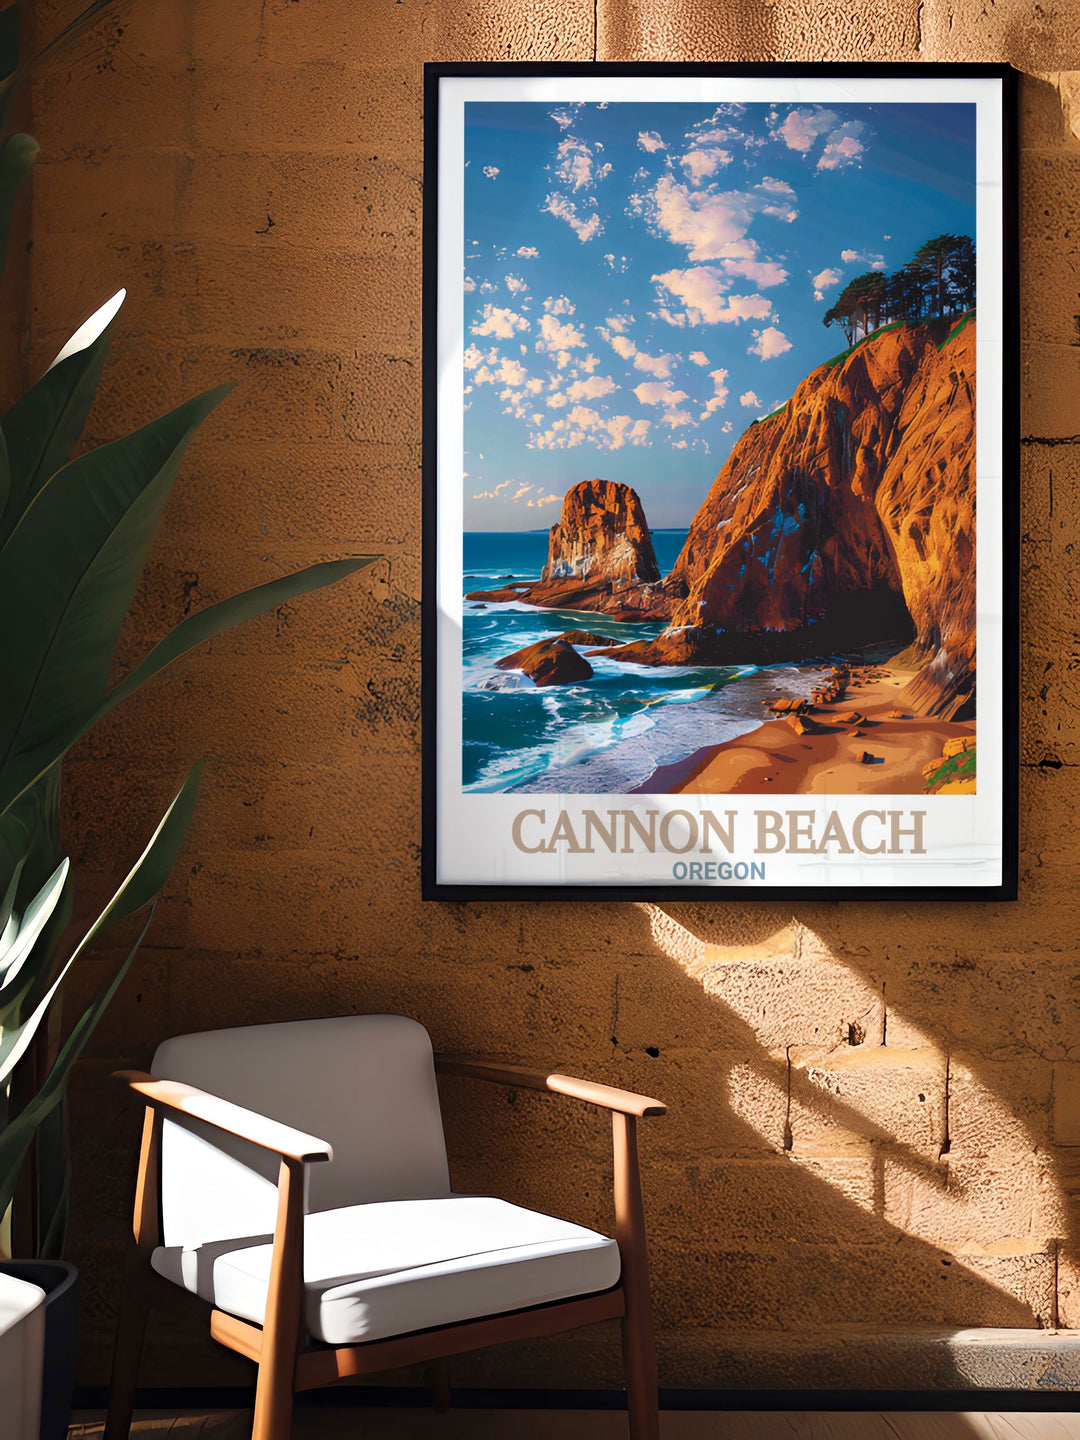 Stunning Cannon Beach poster highlighting Haystack Rock with colorful art and intricate details perfect for brightening up any living space with coastal beauty